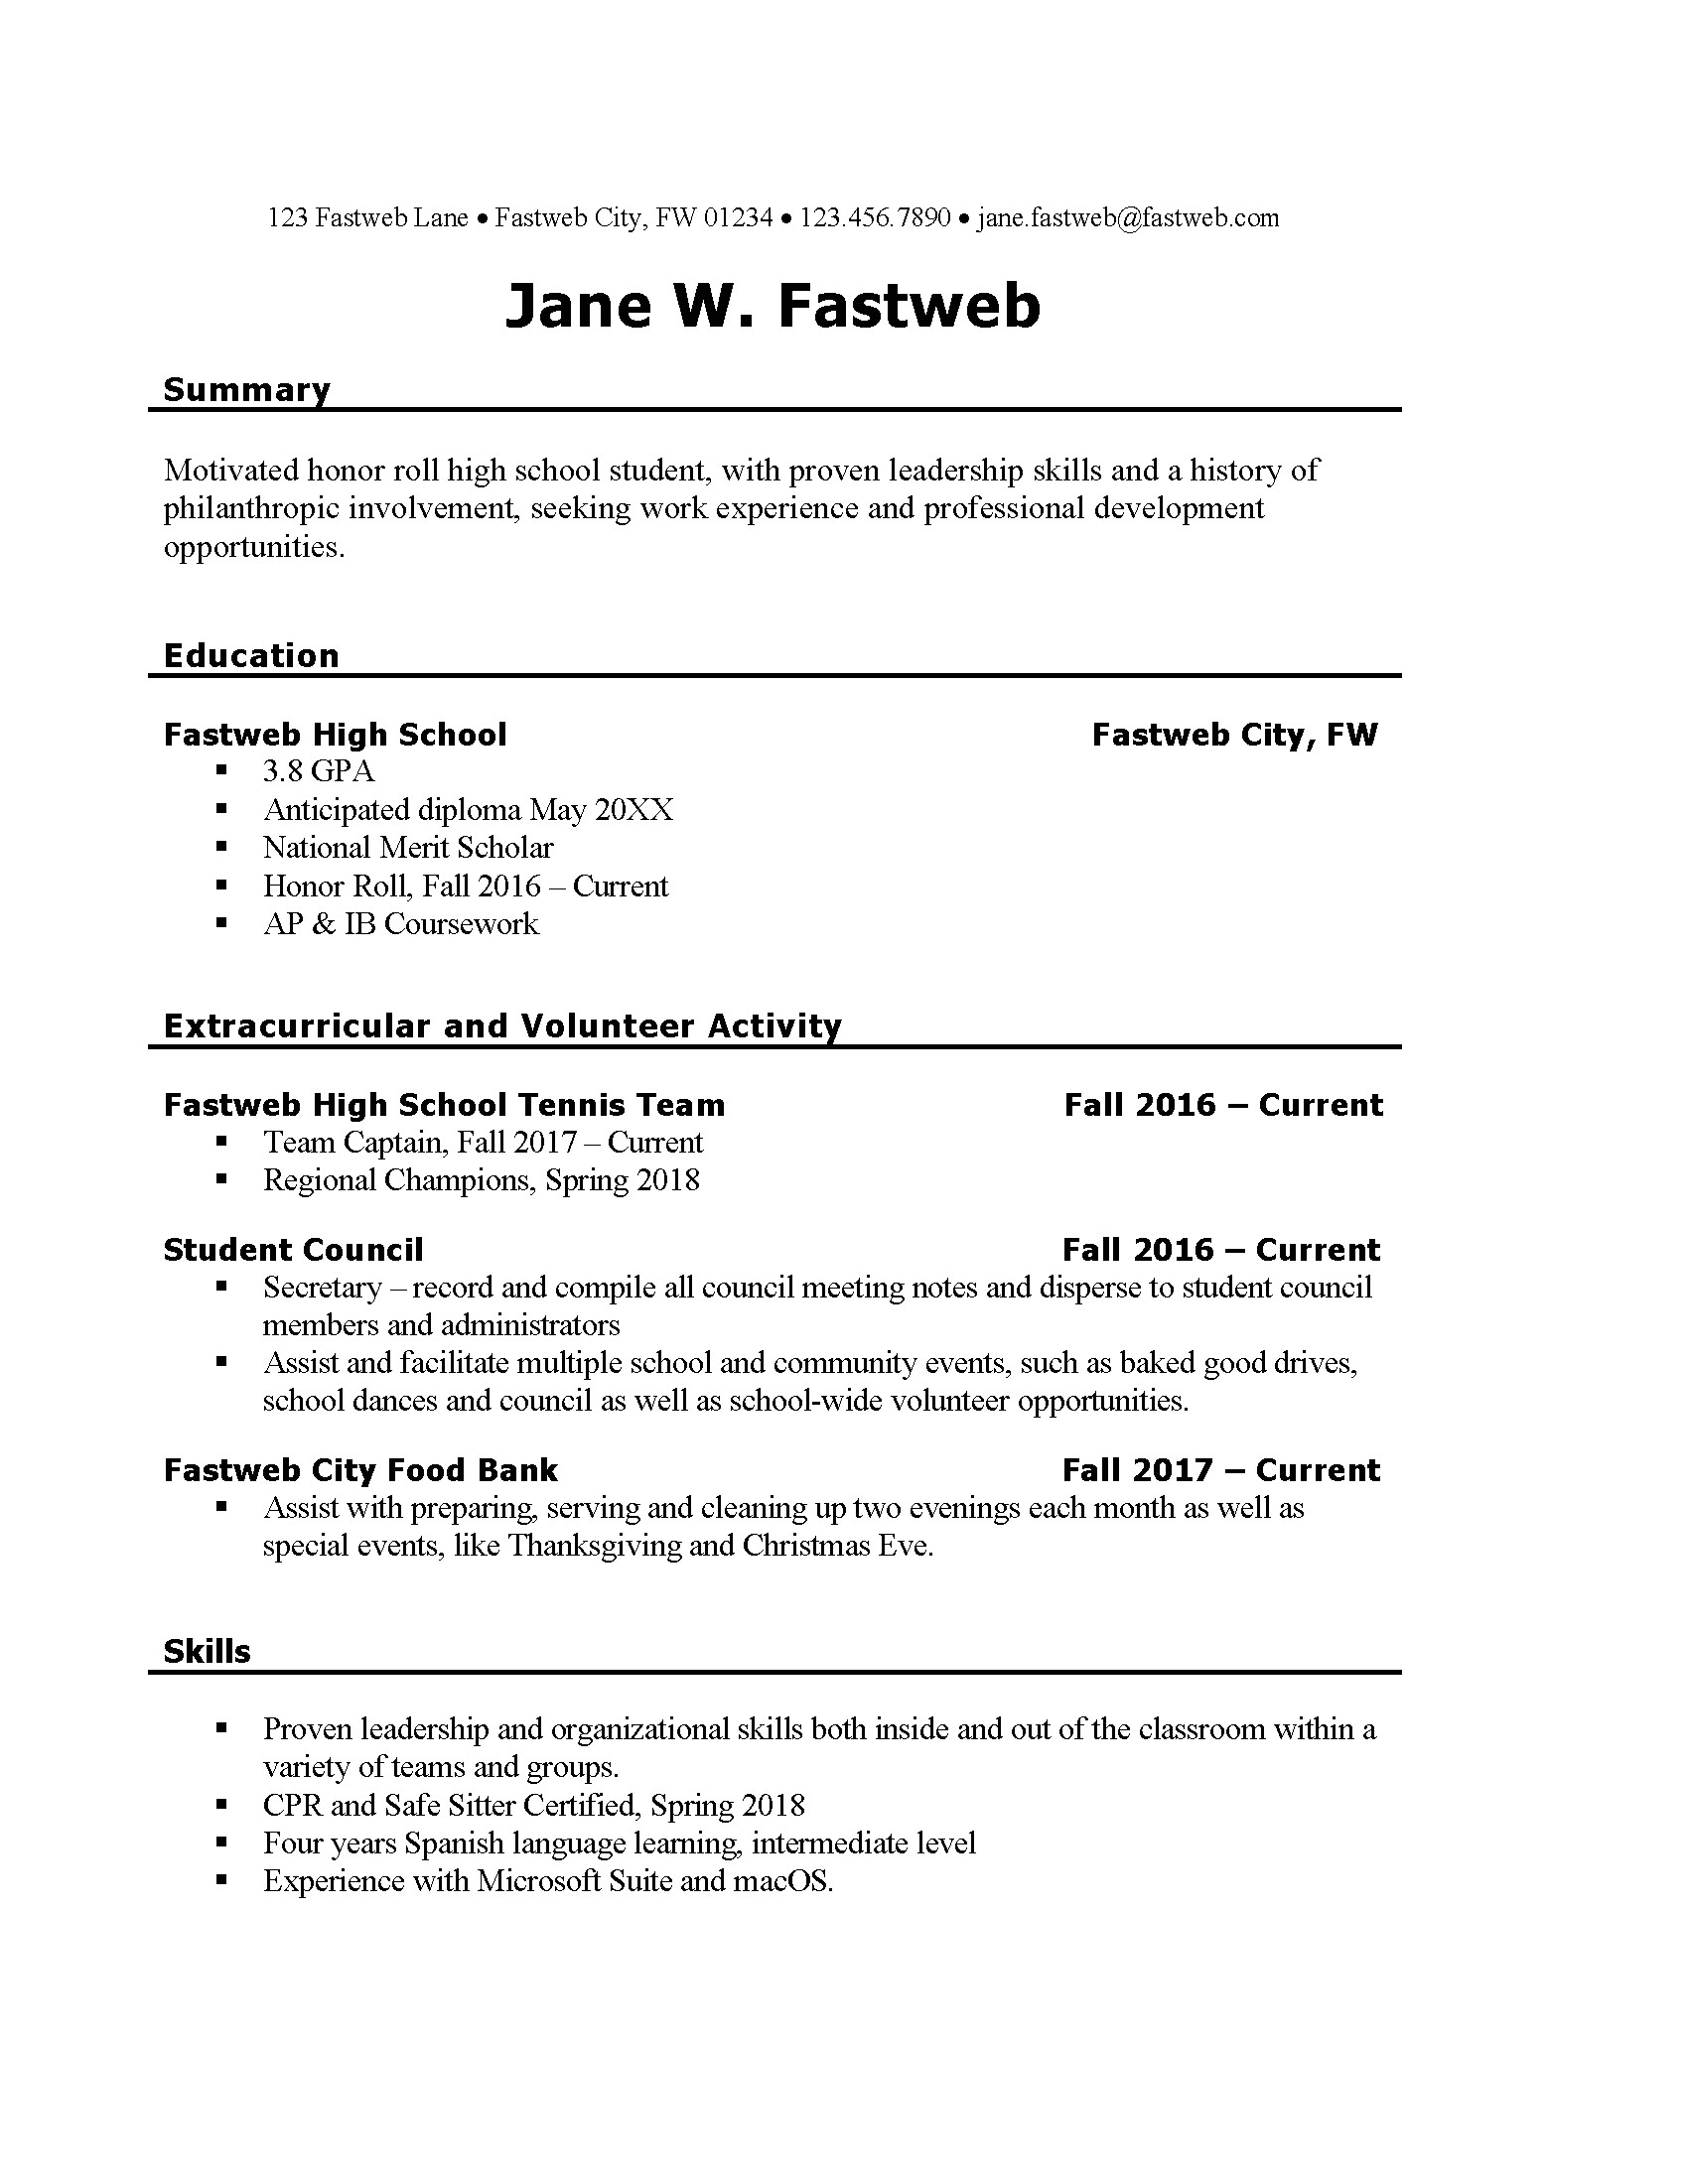 Resume Examples for Students First Job First Part Time Job Resume Sample Fastweb